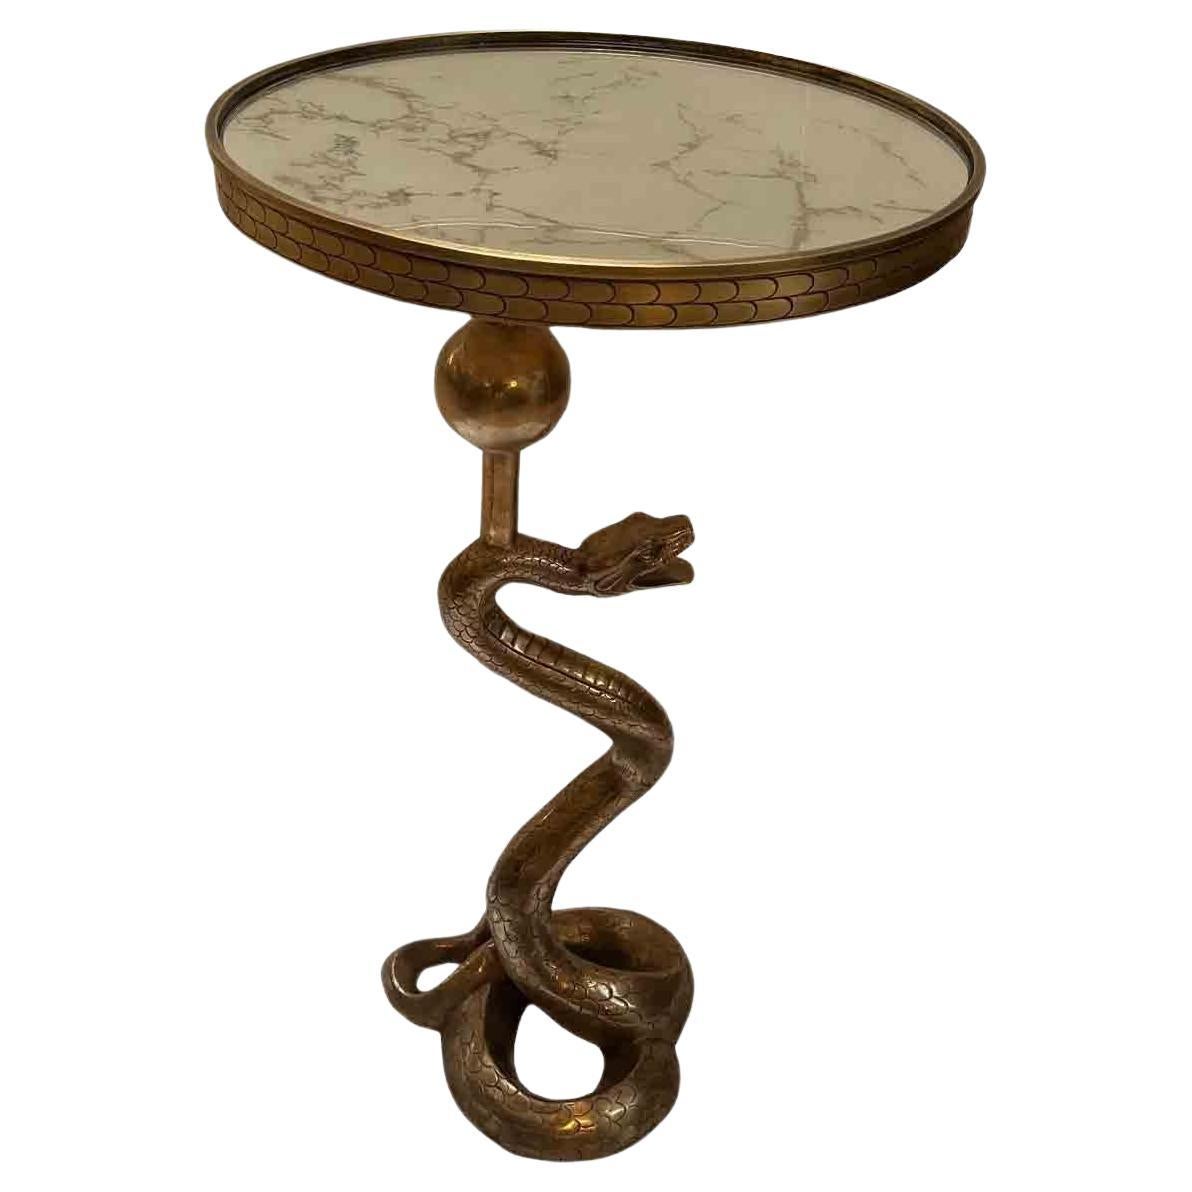 Serpent Side Table with Mirrored Top